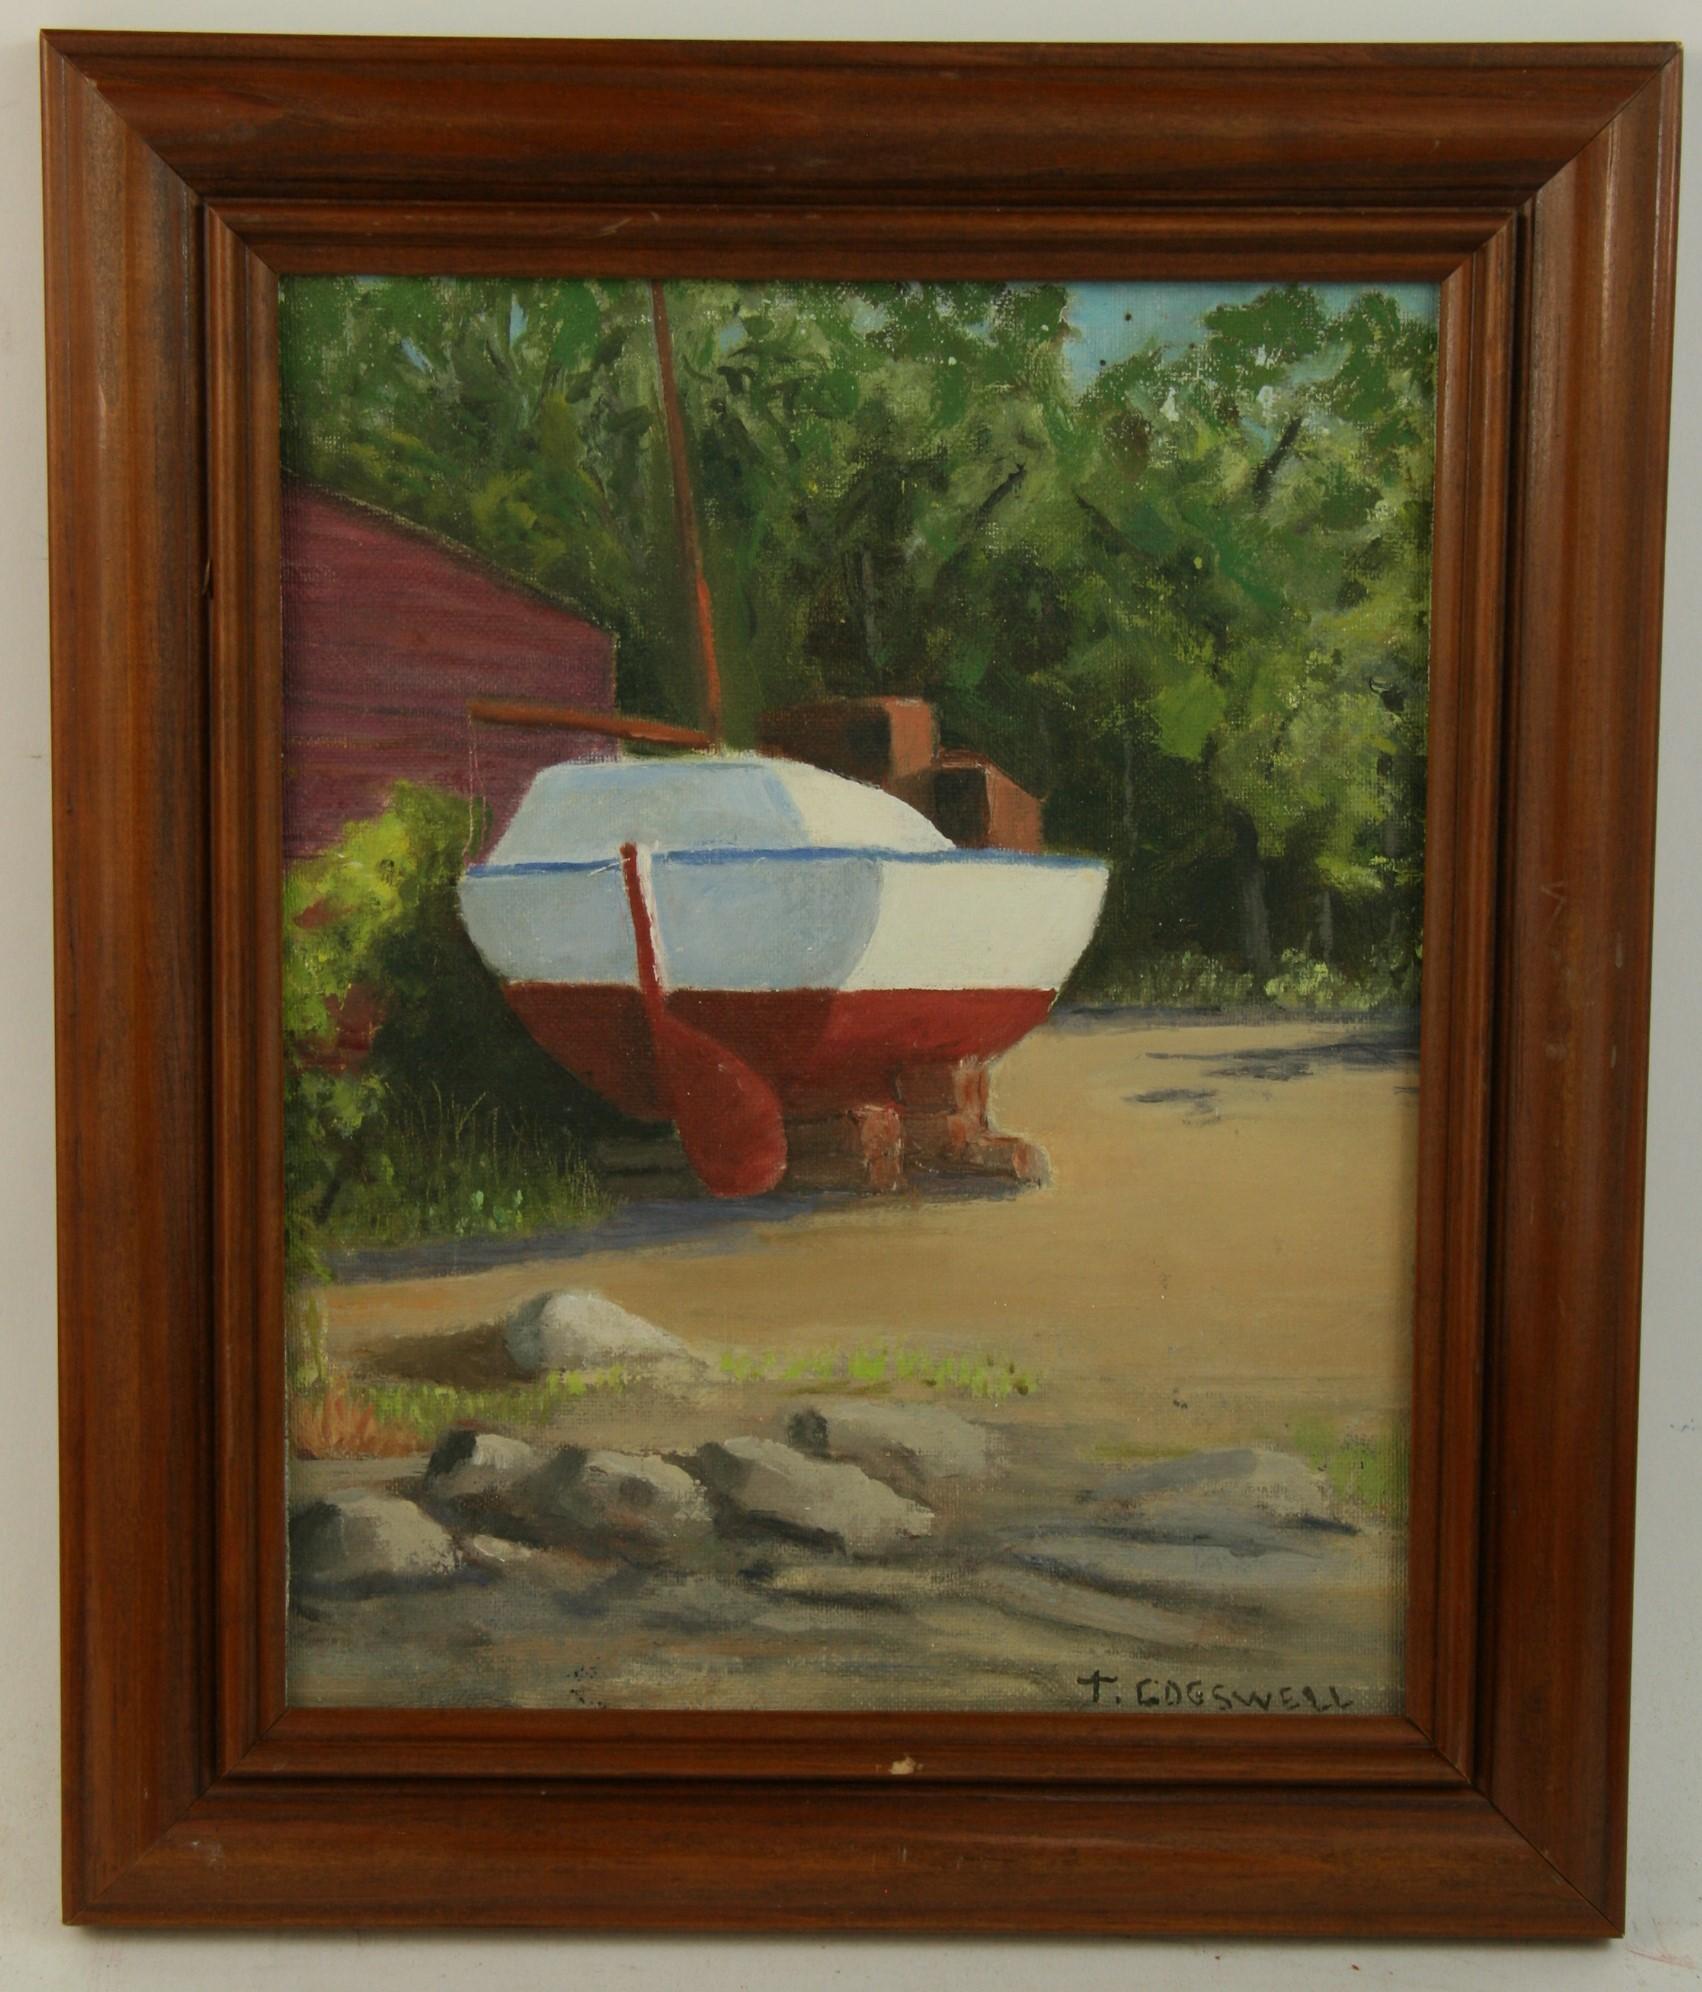 Gooswell Landscape Painting - Vintage Backyard Sailboat Dry Dock Oil Painting